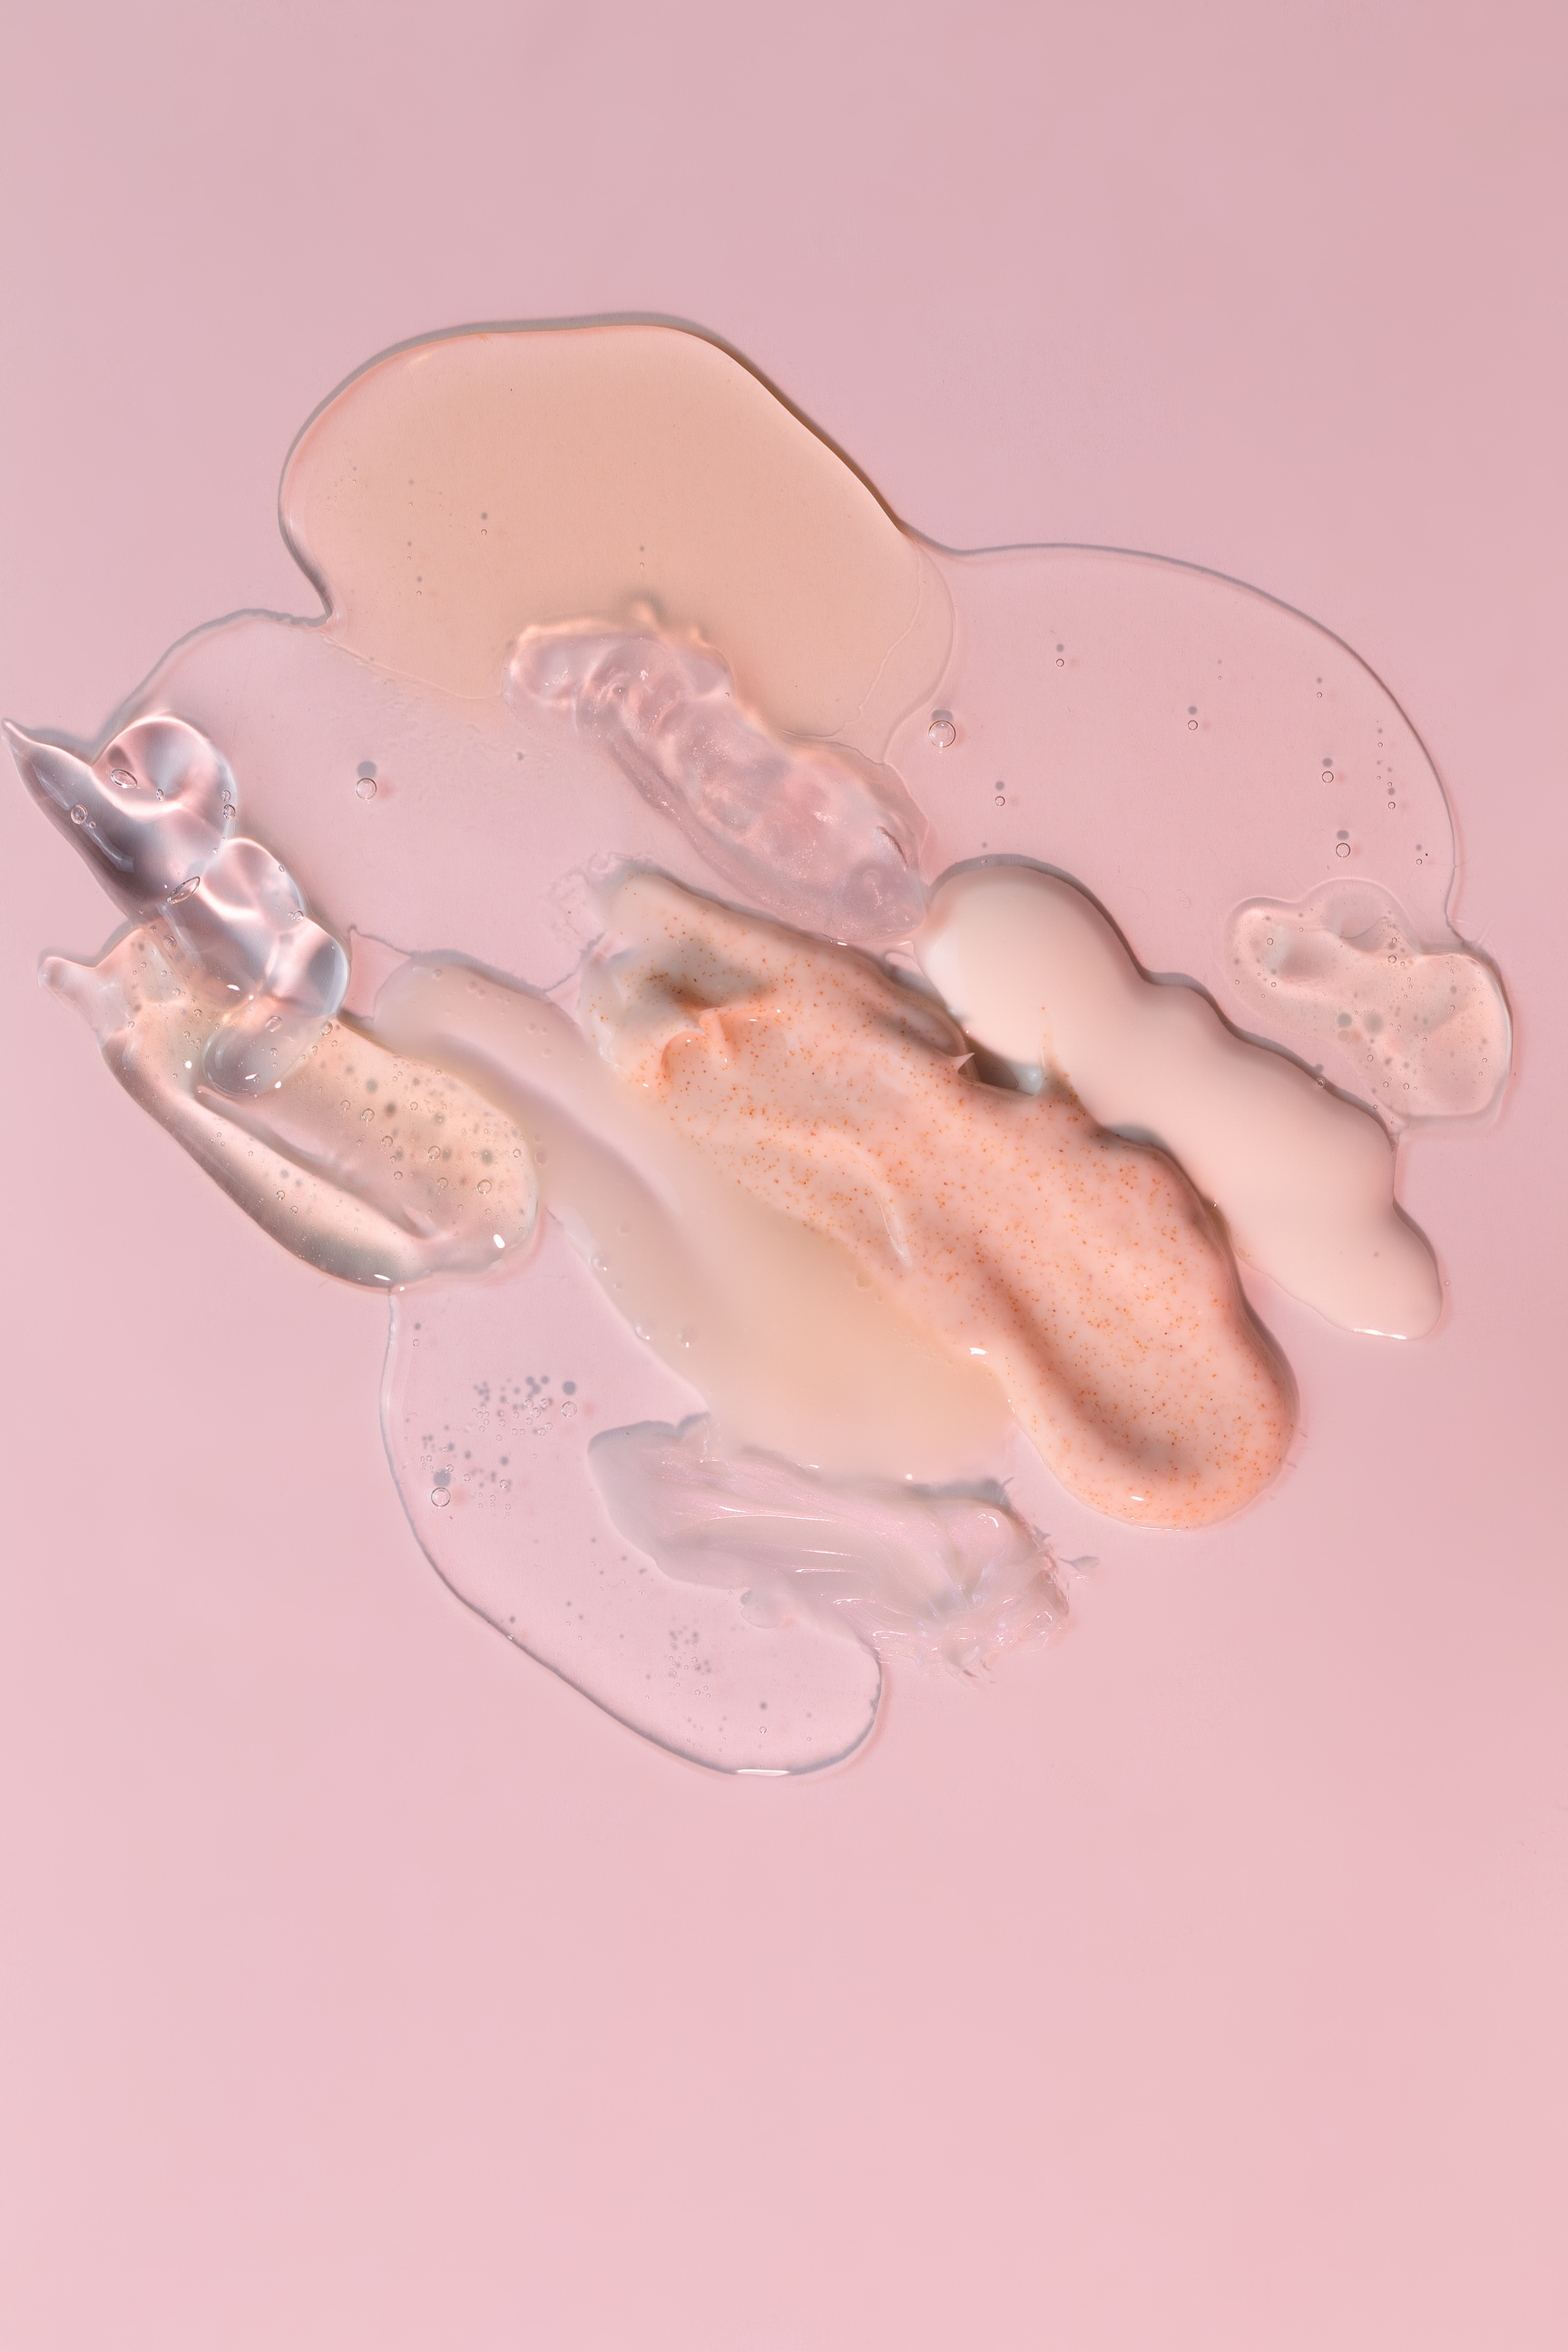 Assorted Liquid Skincare Products on Pink Background